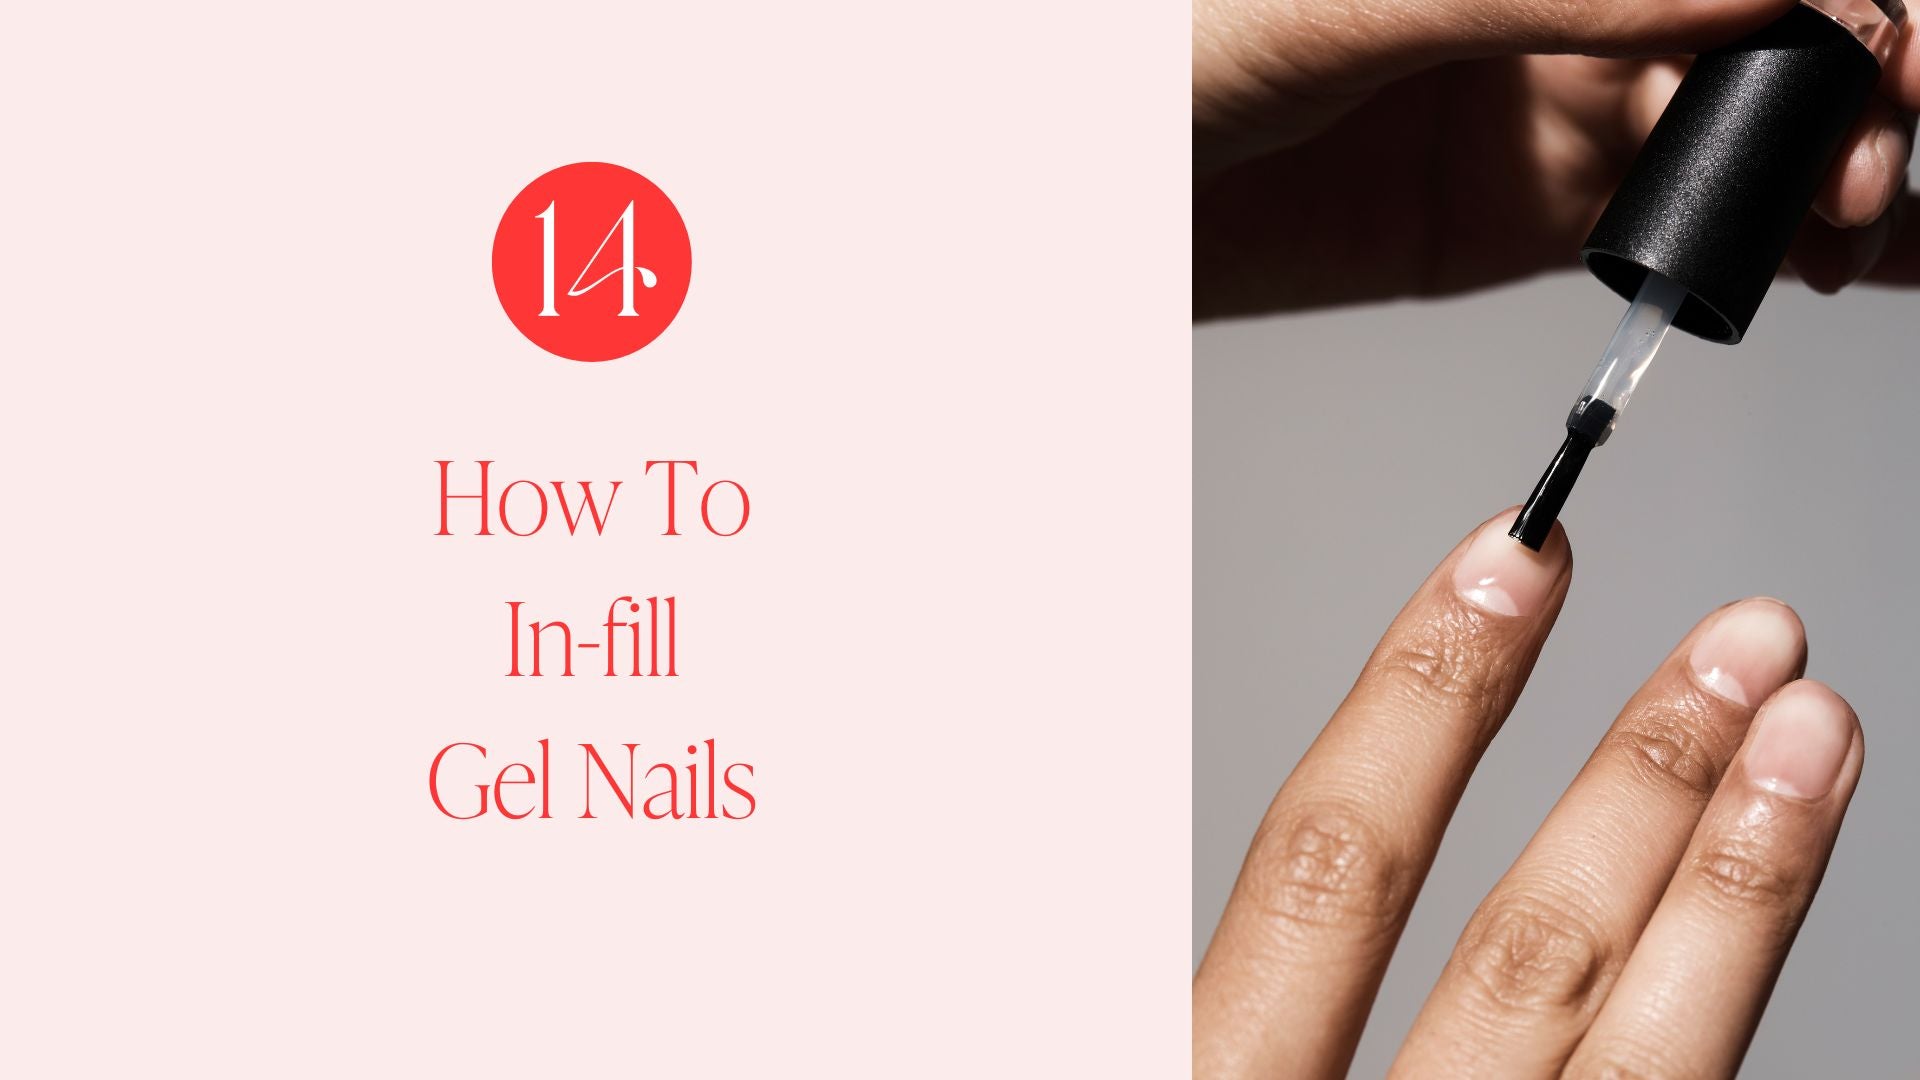 Load video: HOW TO IN-FILL GEL NAILS USING BUILDER GEL